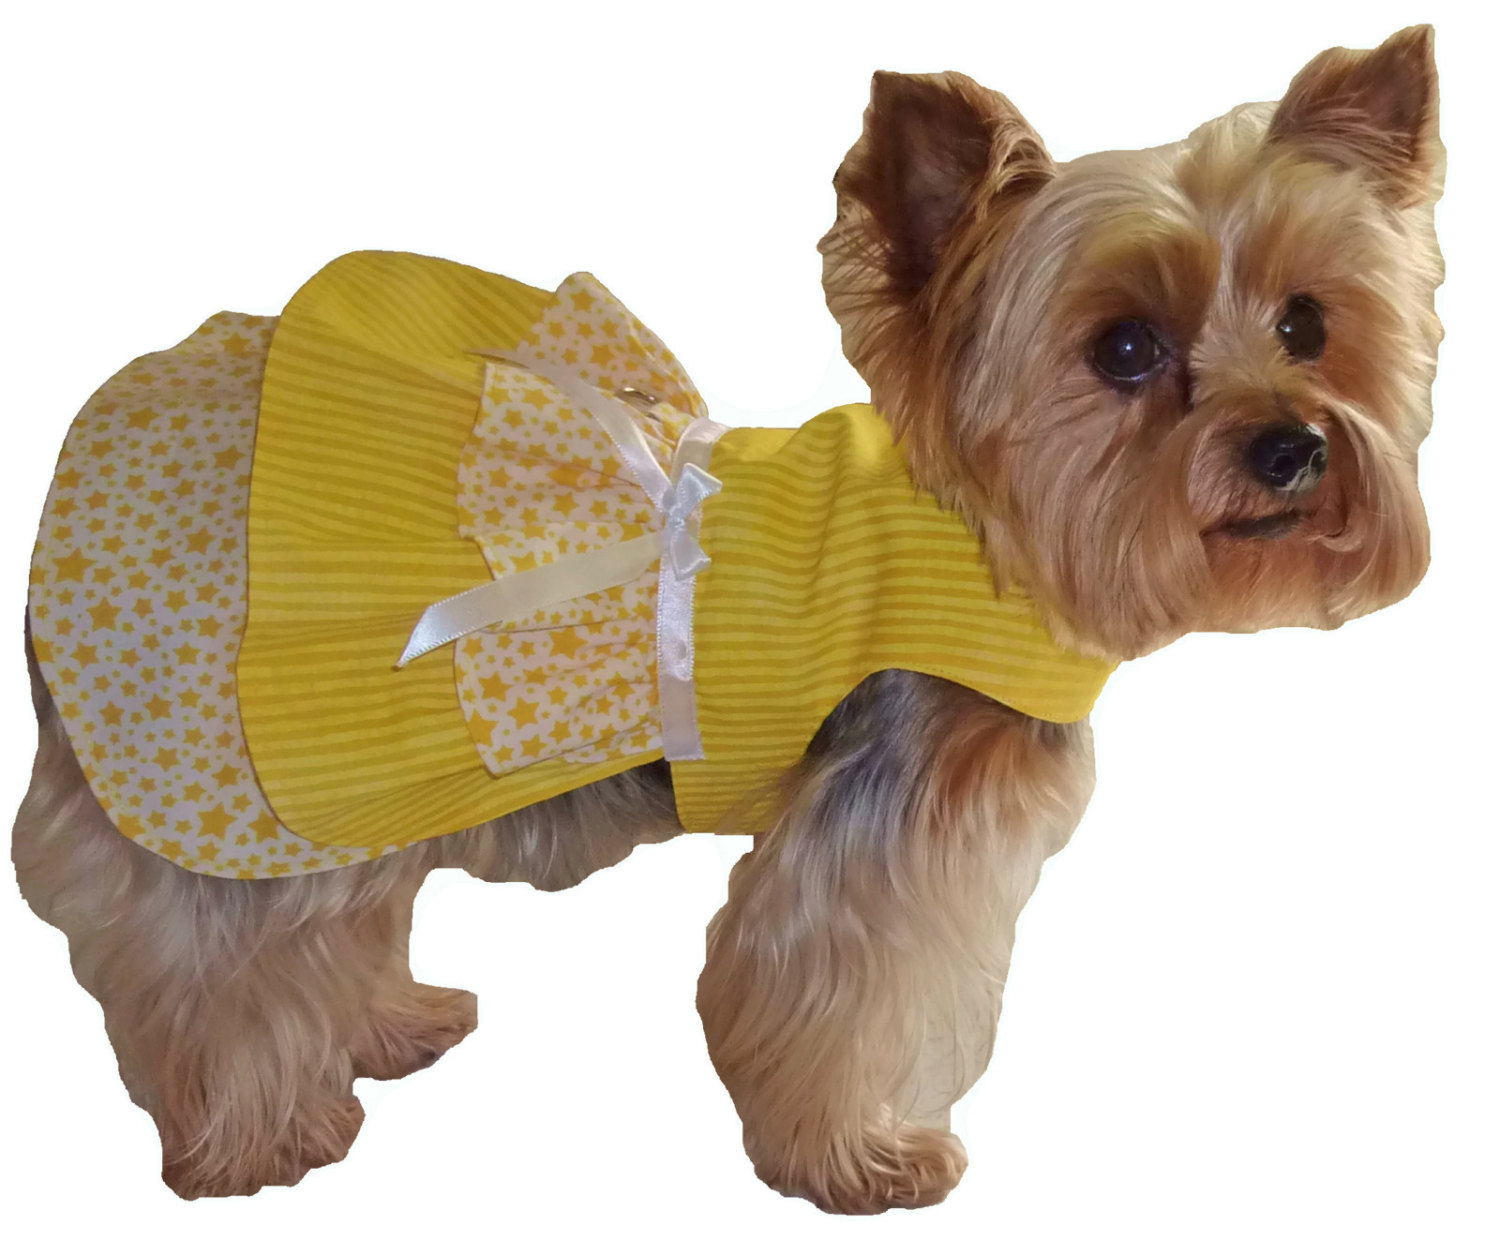 Free Printable Sewing Patterns For Dog Clothes That Are 